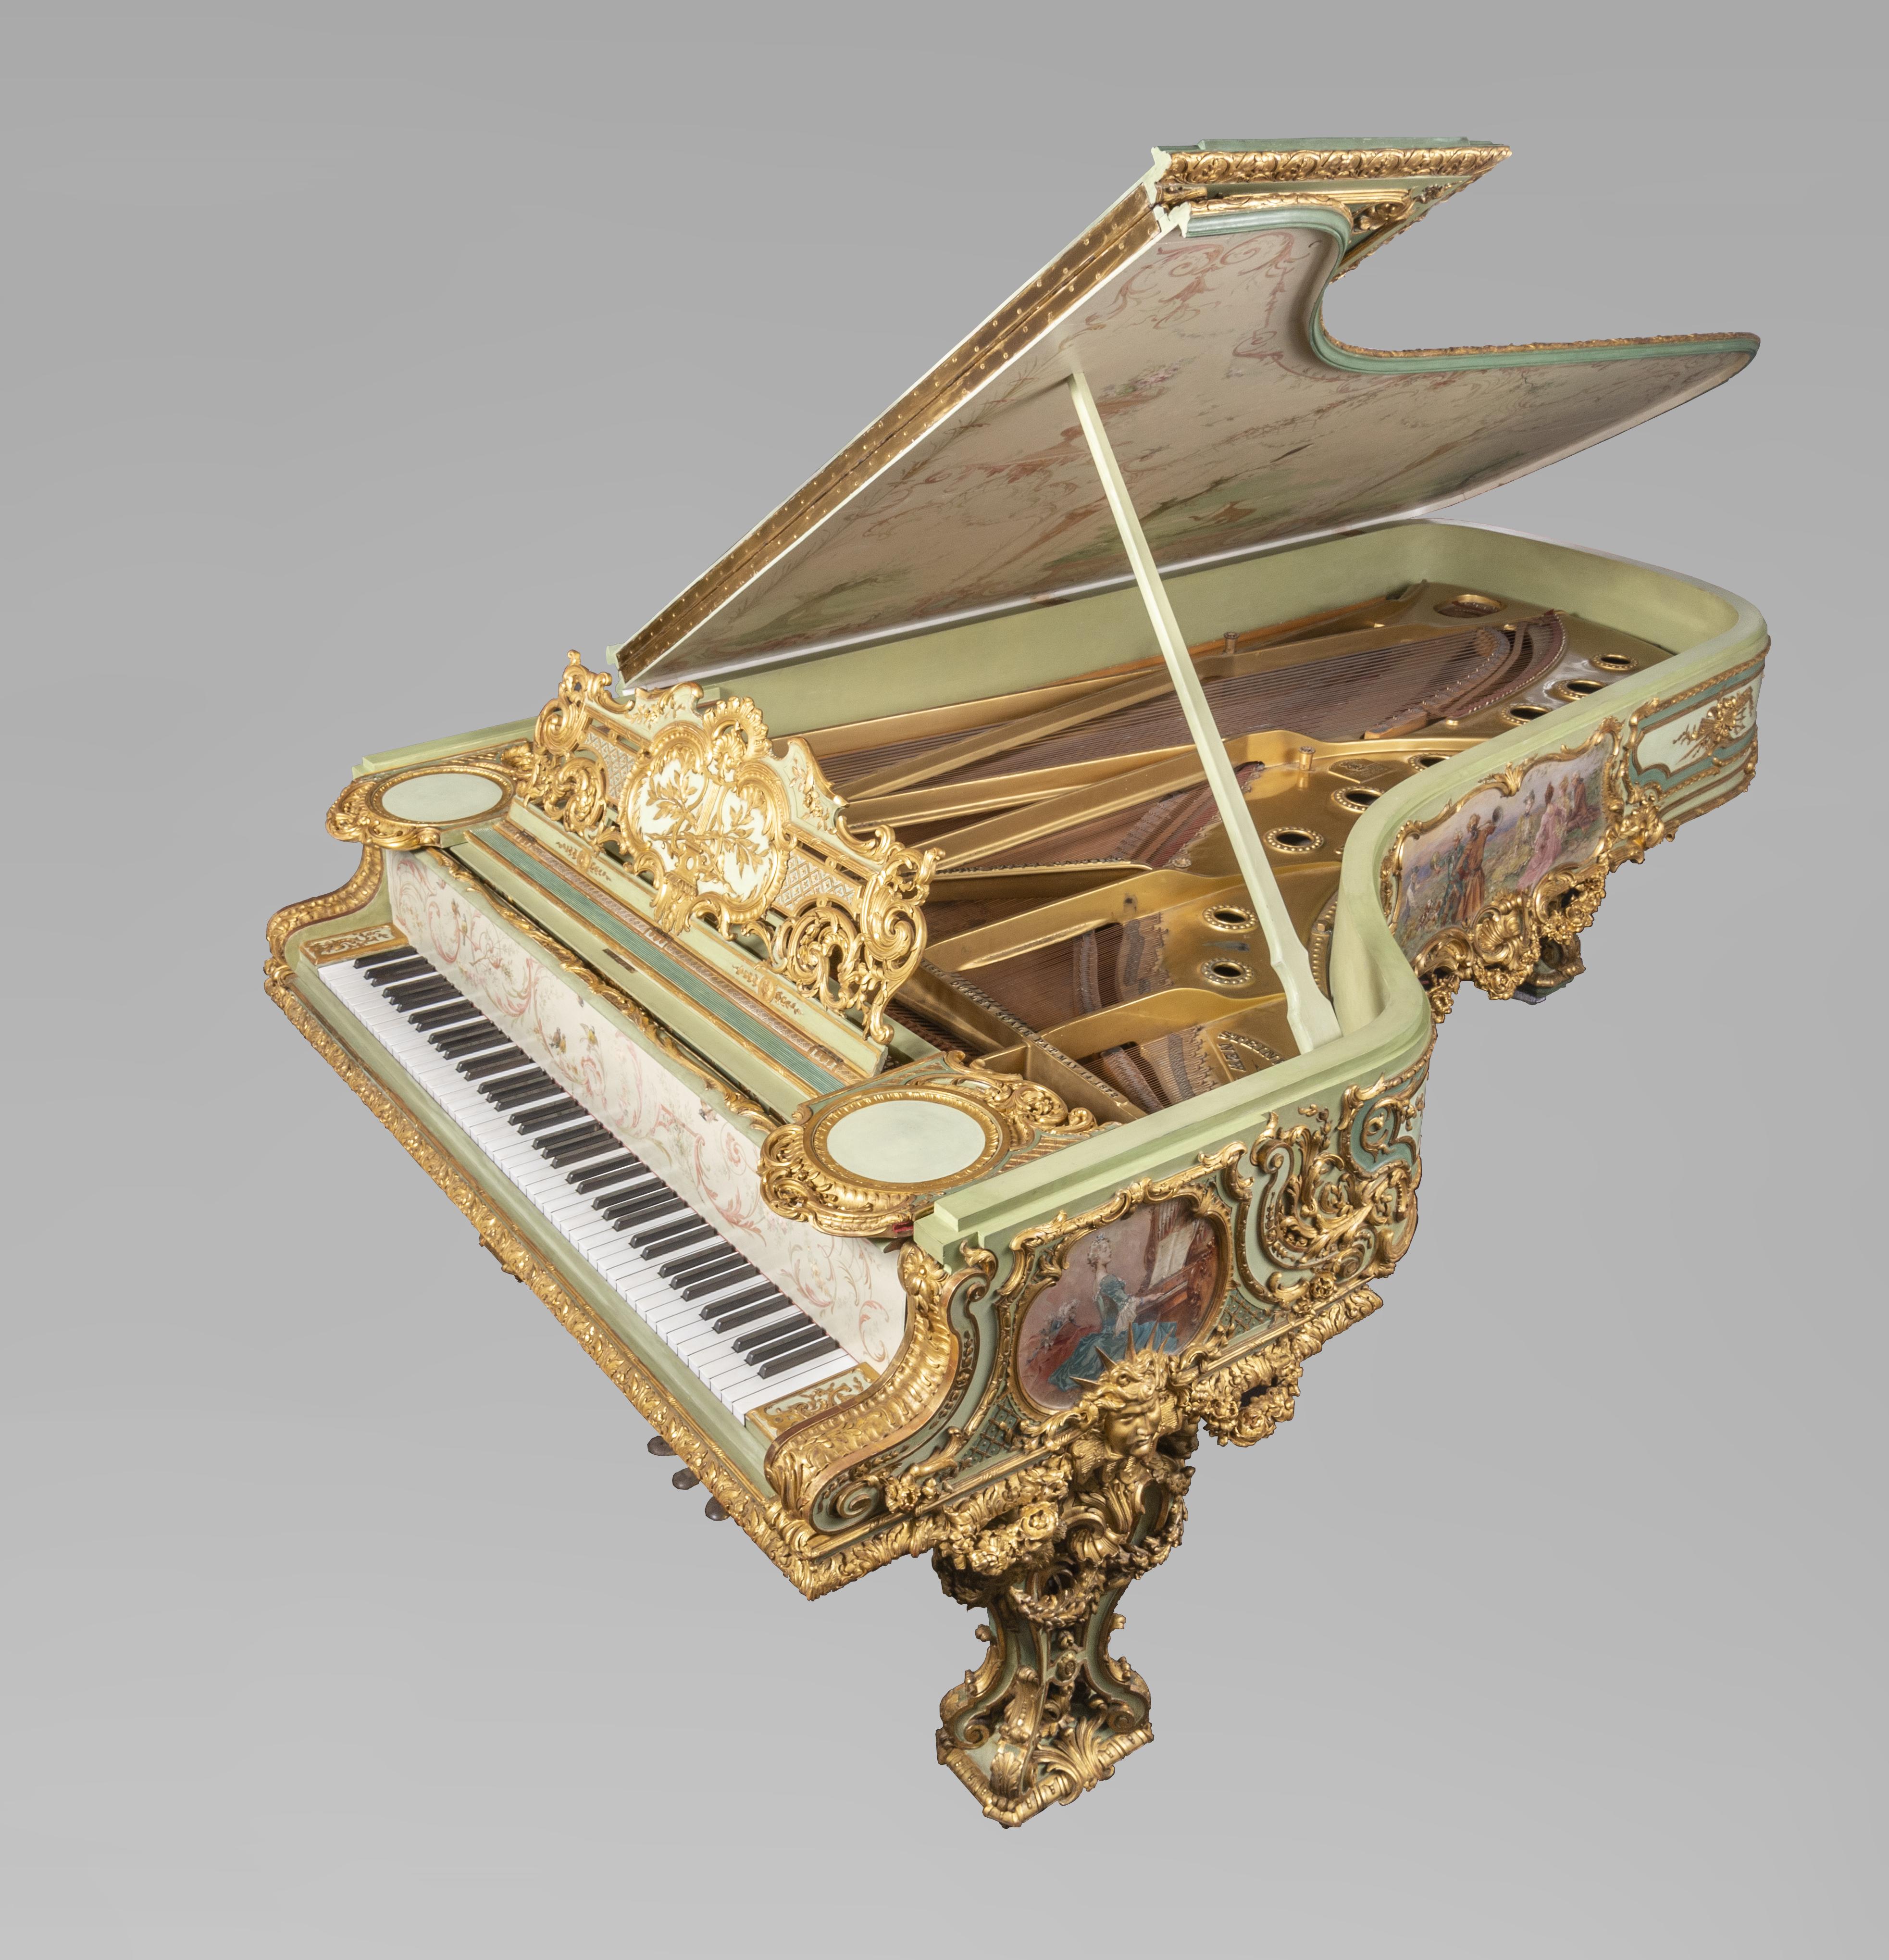 This extraordinary concert grand piano with 88 keys was made by the prestigious firm Steinway & Sons around 1894. The case's decoration was entrusted to the company Cuel & Cie and more precisely to Th. Kammerer.
The order came from one of the